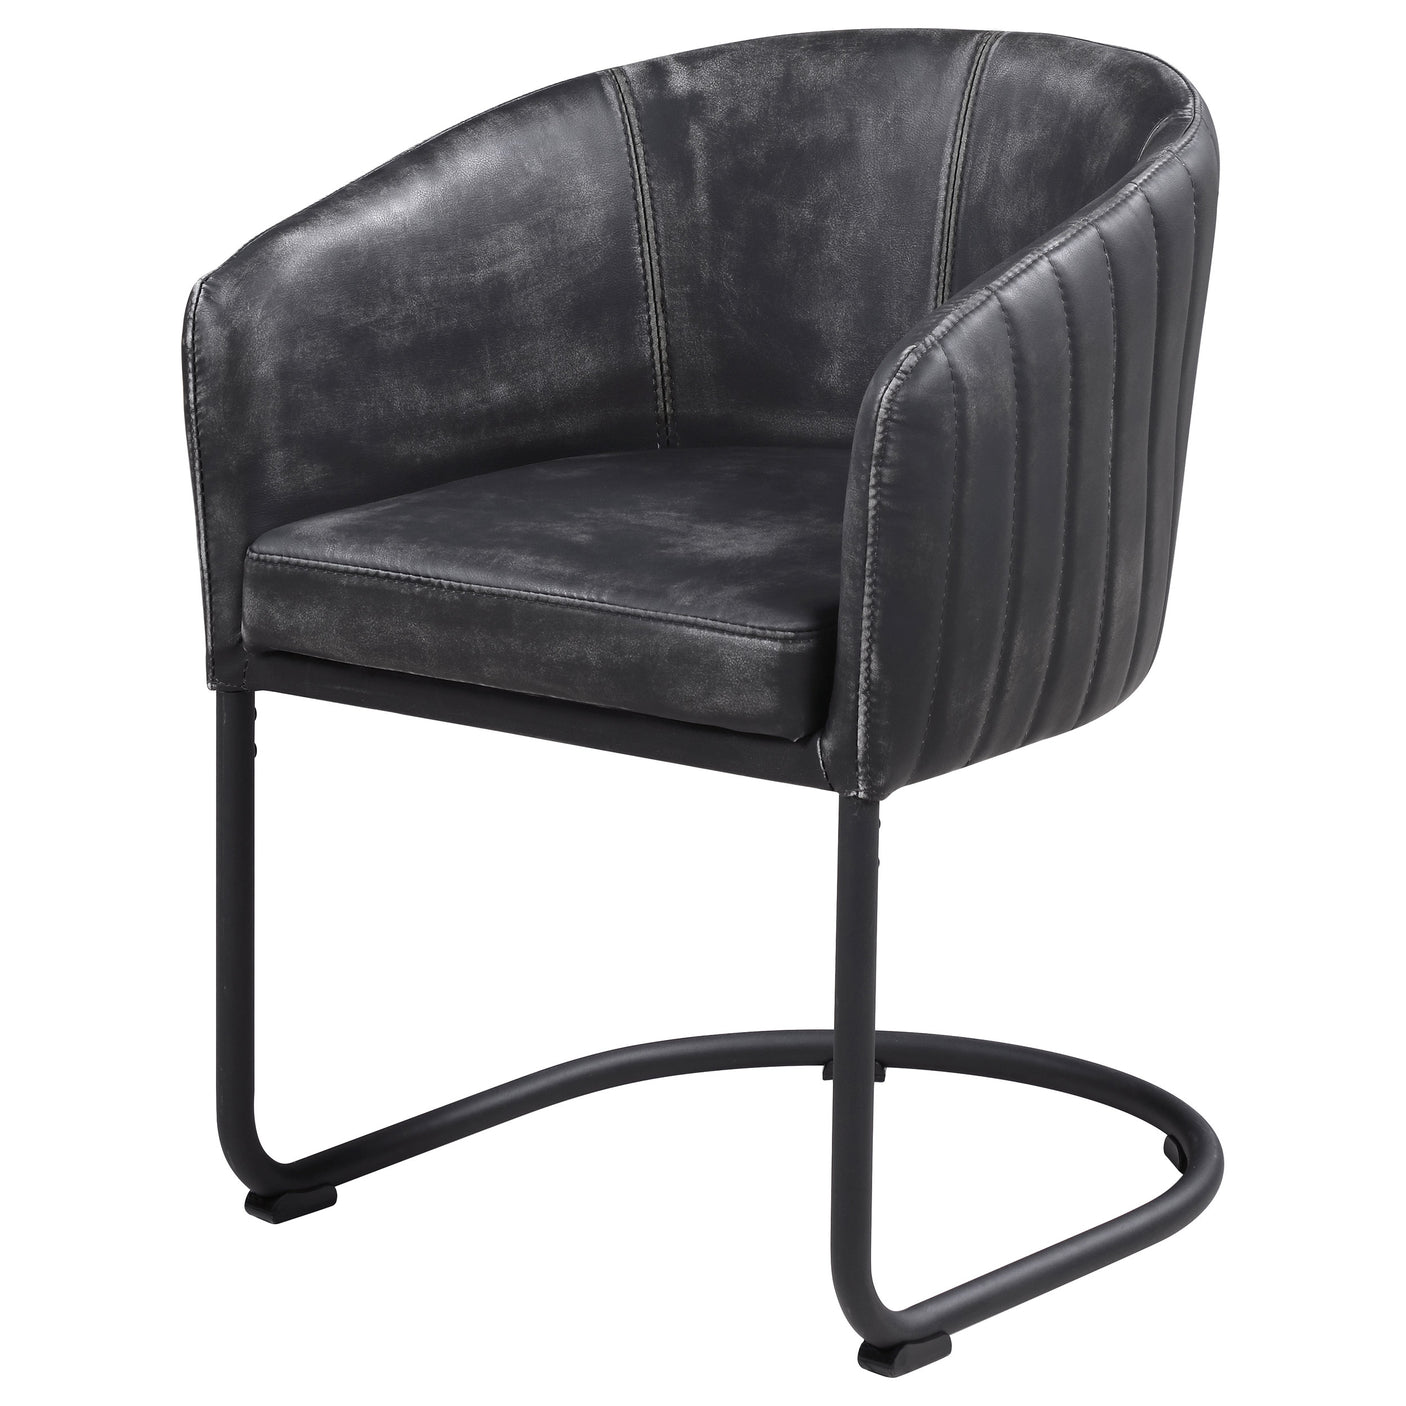 Arm Chair - Banner Upholstered Dining Chair Anthracite and Matte Black